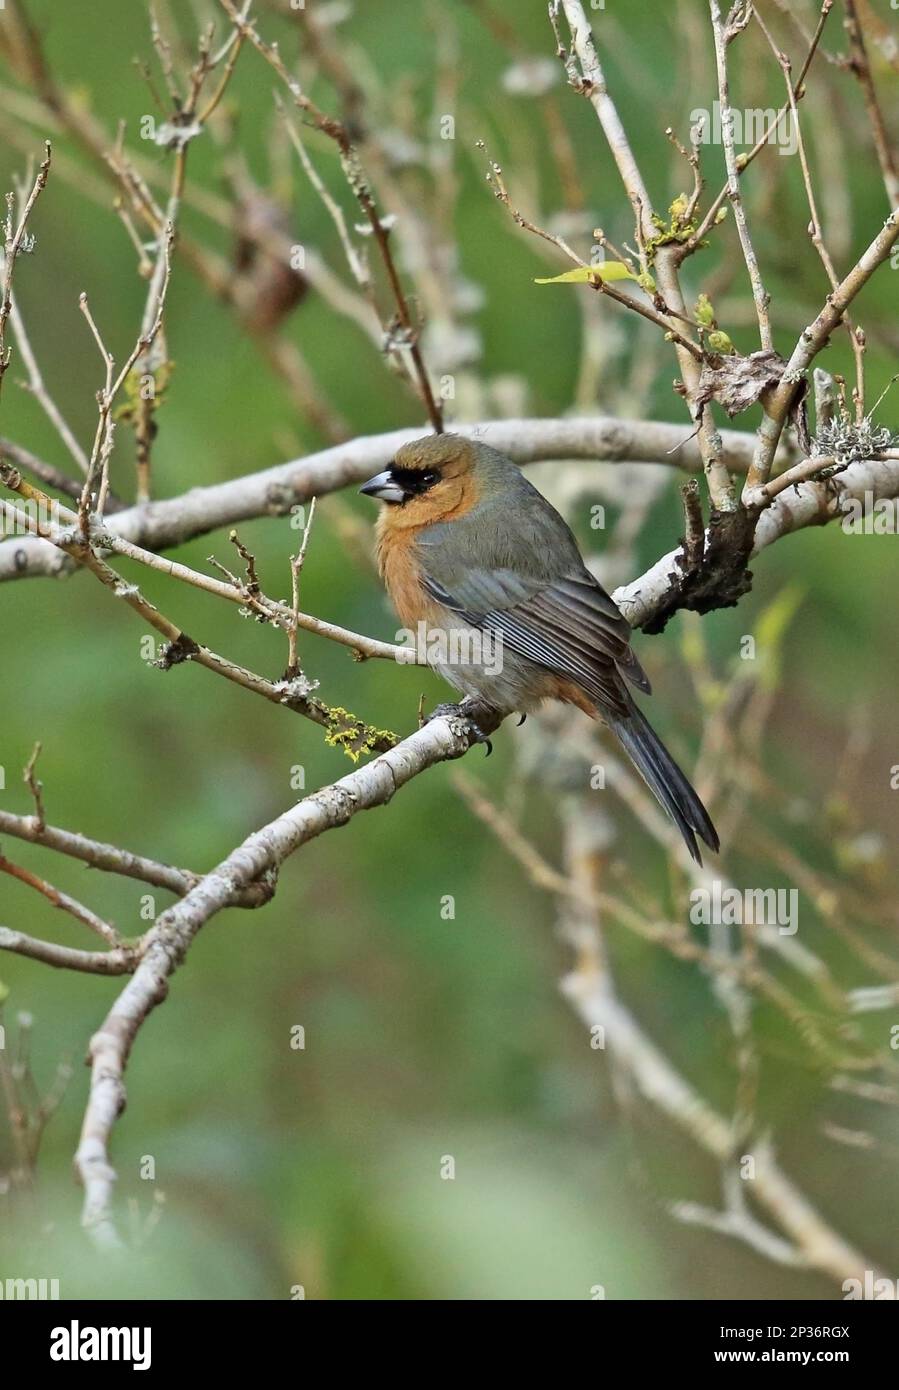 Cinnamon tanager (Schistochlamys ruficapillus ruficapillus) adult, sitting on a branch, Atlantic rainforest, Brazil Stock Photo